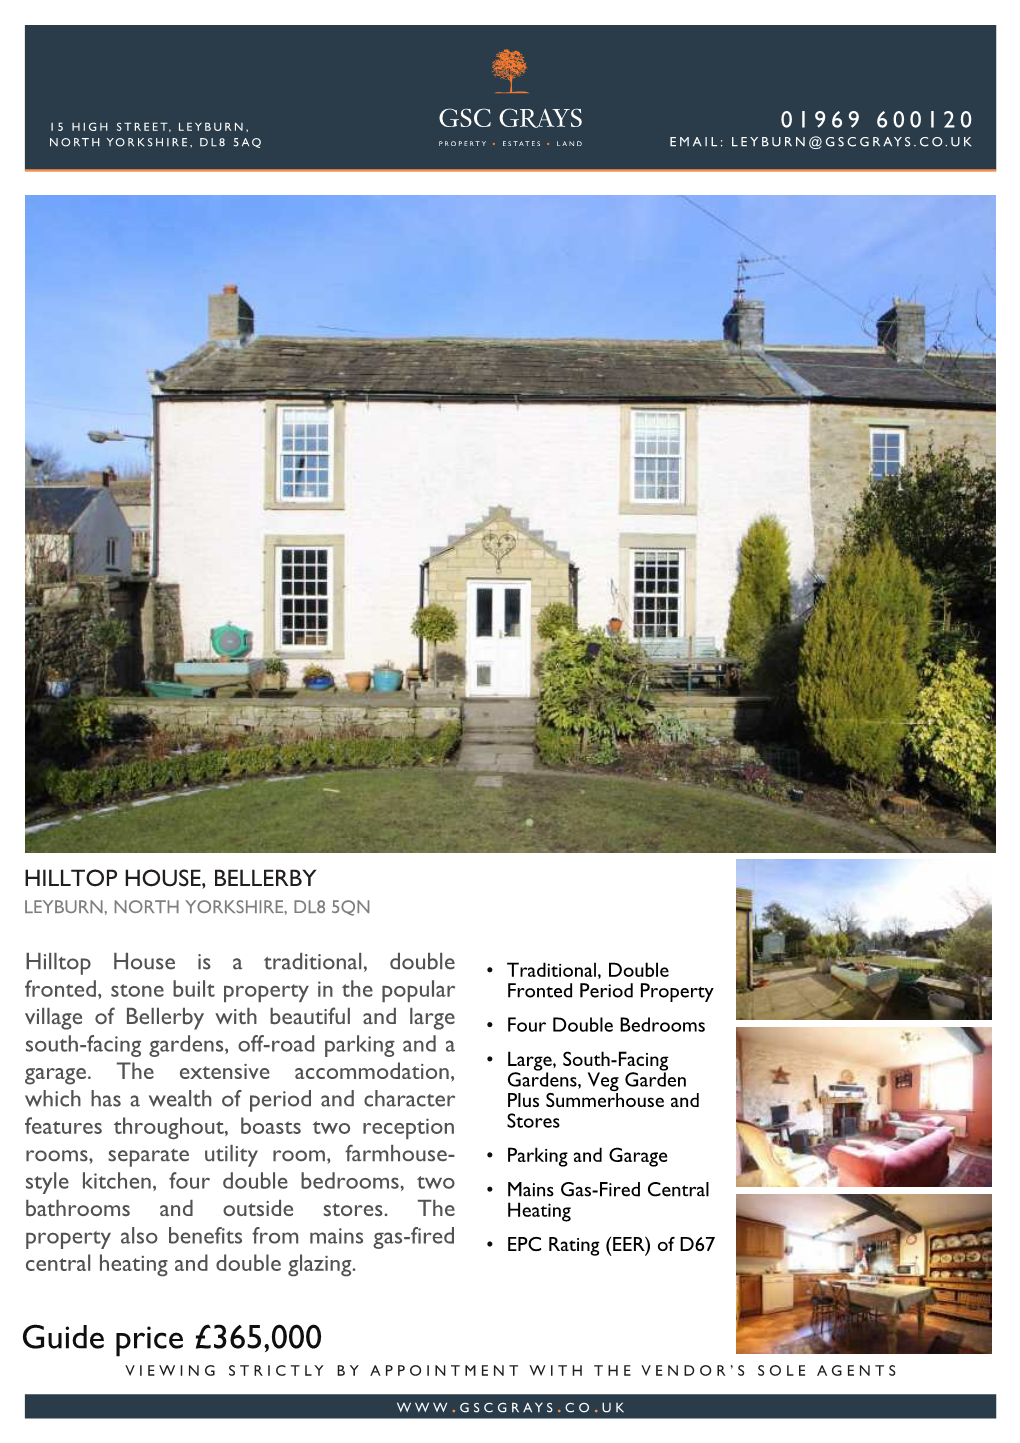 Guide Price £365,000 VIEWING STRICTLY by APPOINTMENT with the VENDOR’S SOLE AGENTS